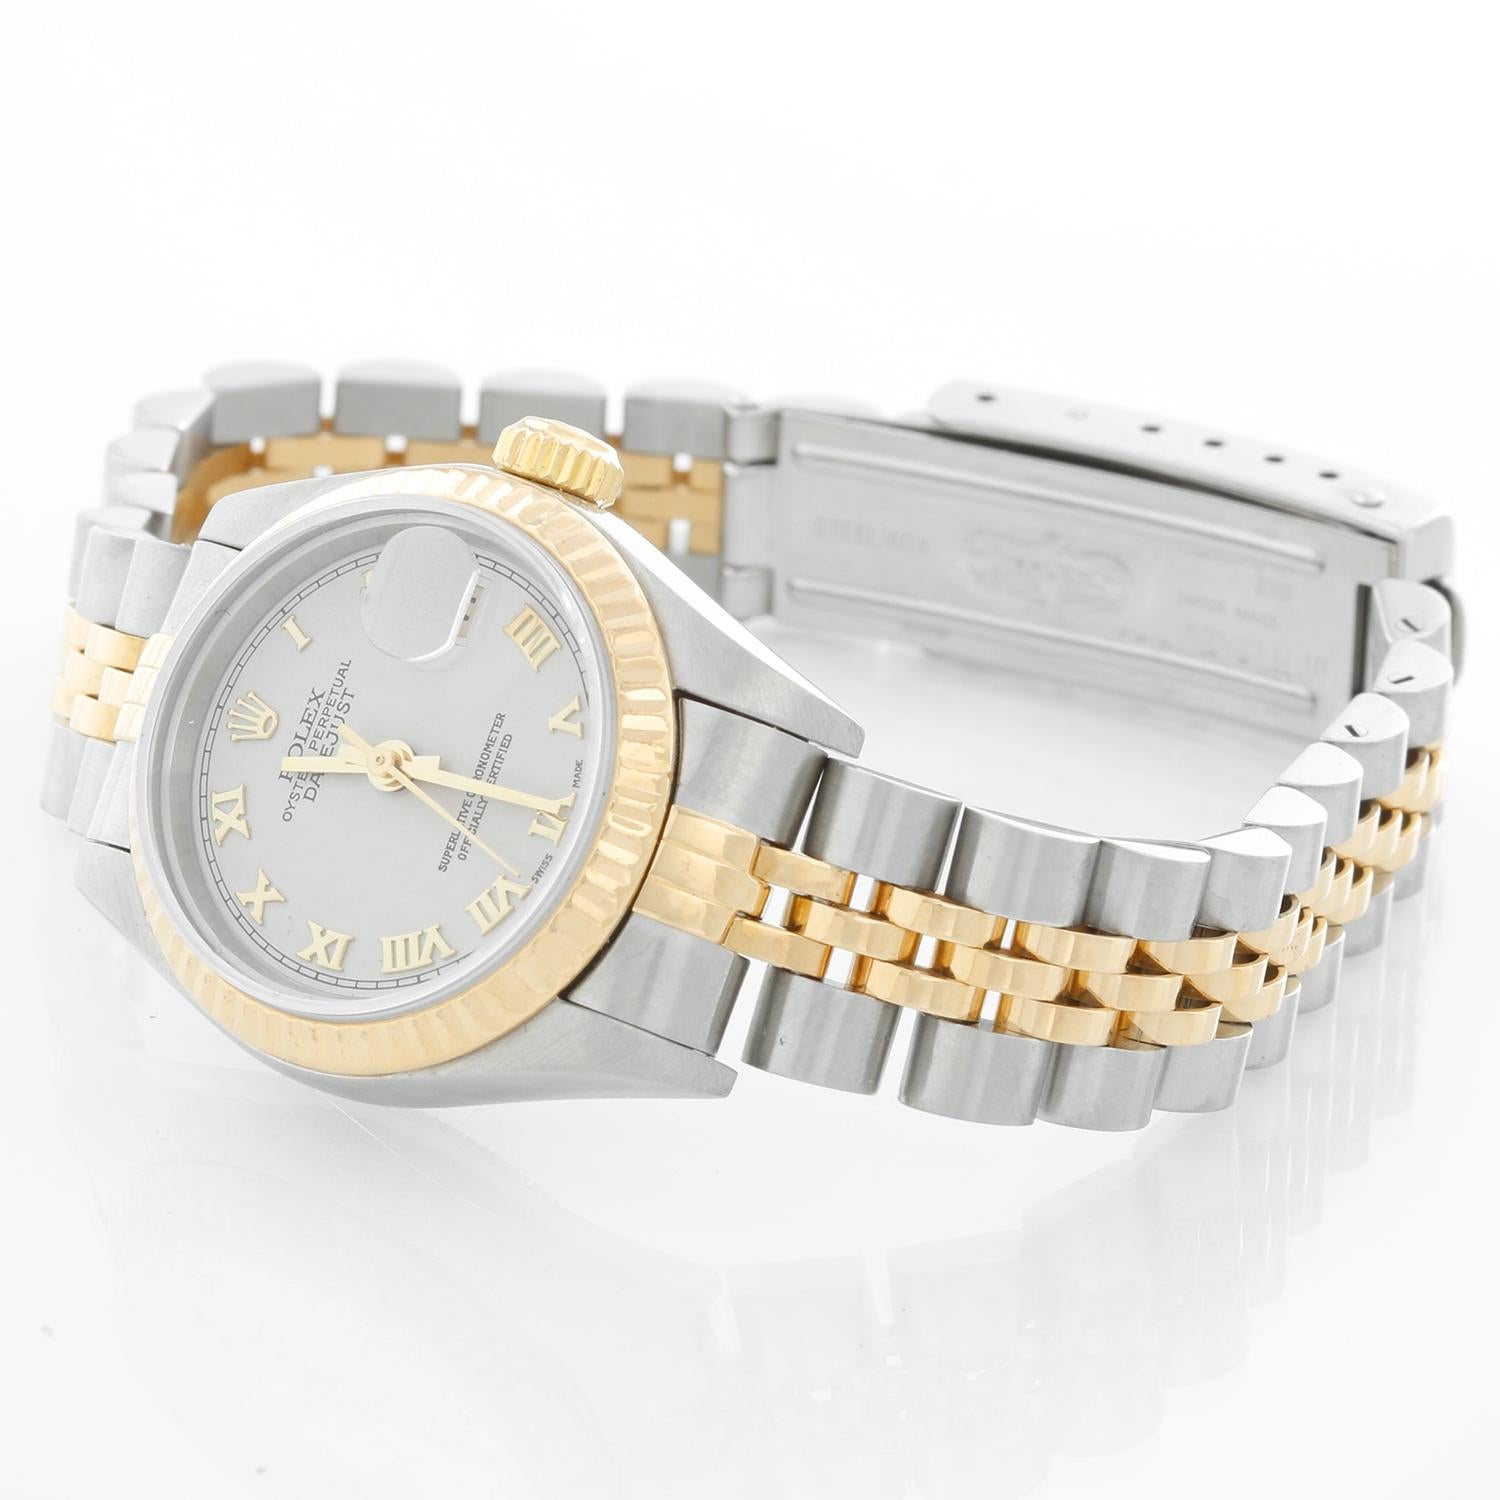 Rolex  2-Tone Datejust Steel & Gold Ladies Watch 69173 - Automatic winding, 29 jewels, Quickset date, sapphire crystal. Stainless steel case with 18k yellow gold fluted bezel . Cream Pyramid dial. Stainless steel and 18k yellow gold Jubilee